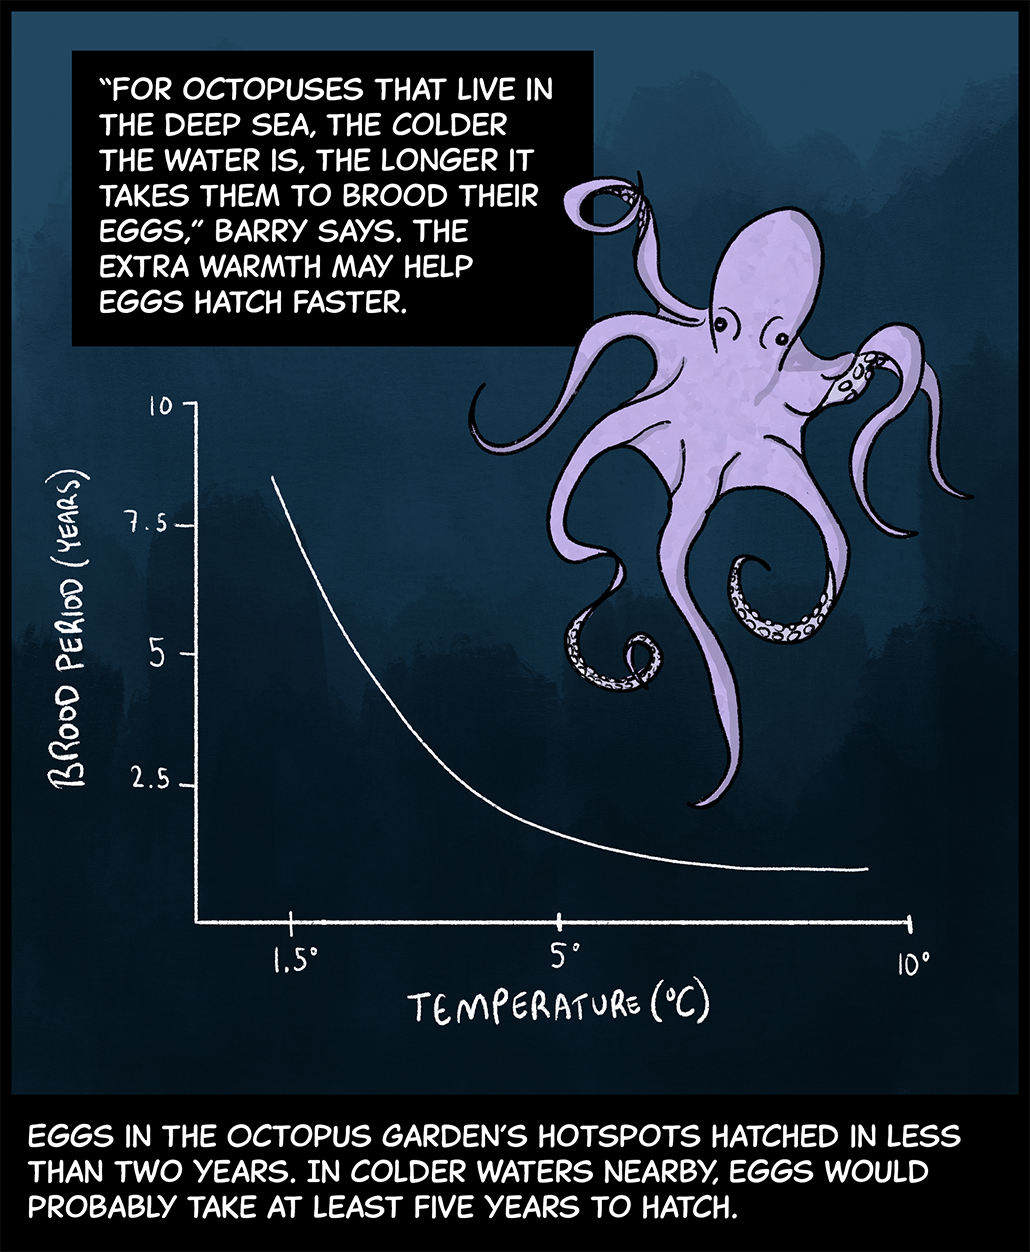 Text (above image): “For octopuses that live in the deep sea, the colder the water is, the longer it takes them to brood their eggs,” Barry says. The extra warmth may help eggs hatch faster. Image: A purple pearl octopus with its arms sprawled out drifts in dark waters above a graph. The graph shows how the brood period for octopus eggs (measured in years) declines as water temperature increases (measured in degrees Celsius). Text (below image): Eggs in the Octopus Garden’s hotspots hatched in less than two years. In colder waters nearby, eggs would probably take at least five years to hatch. 